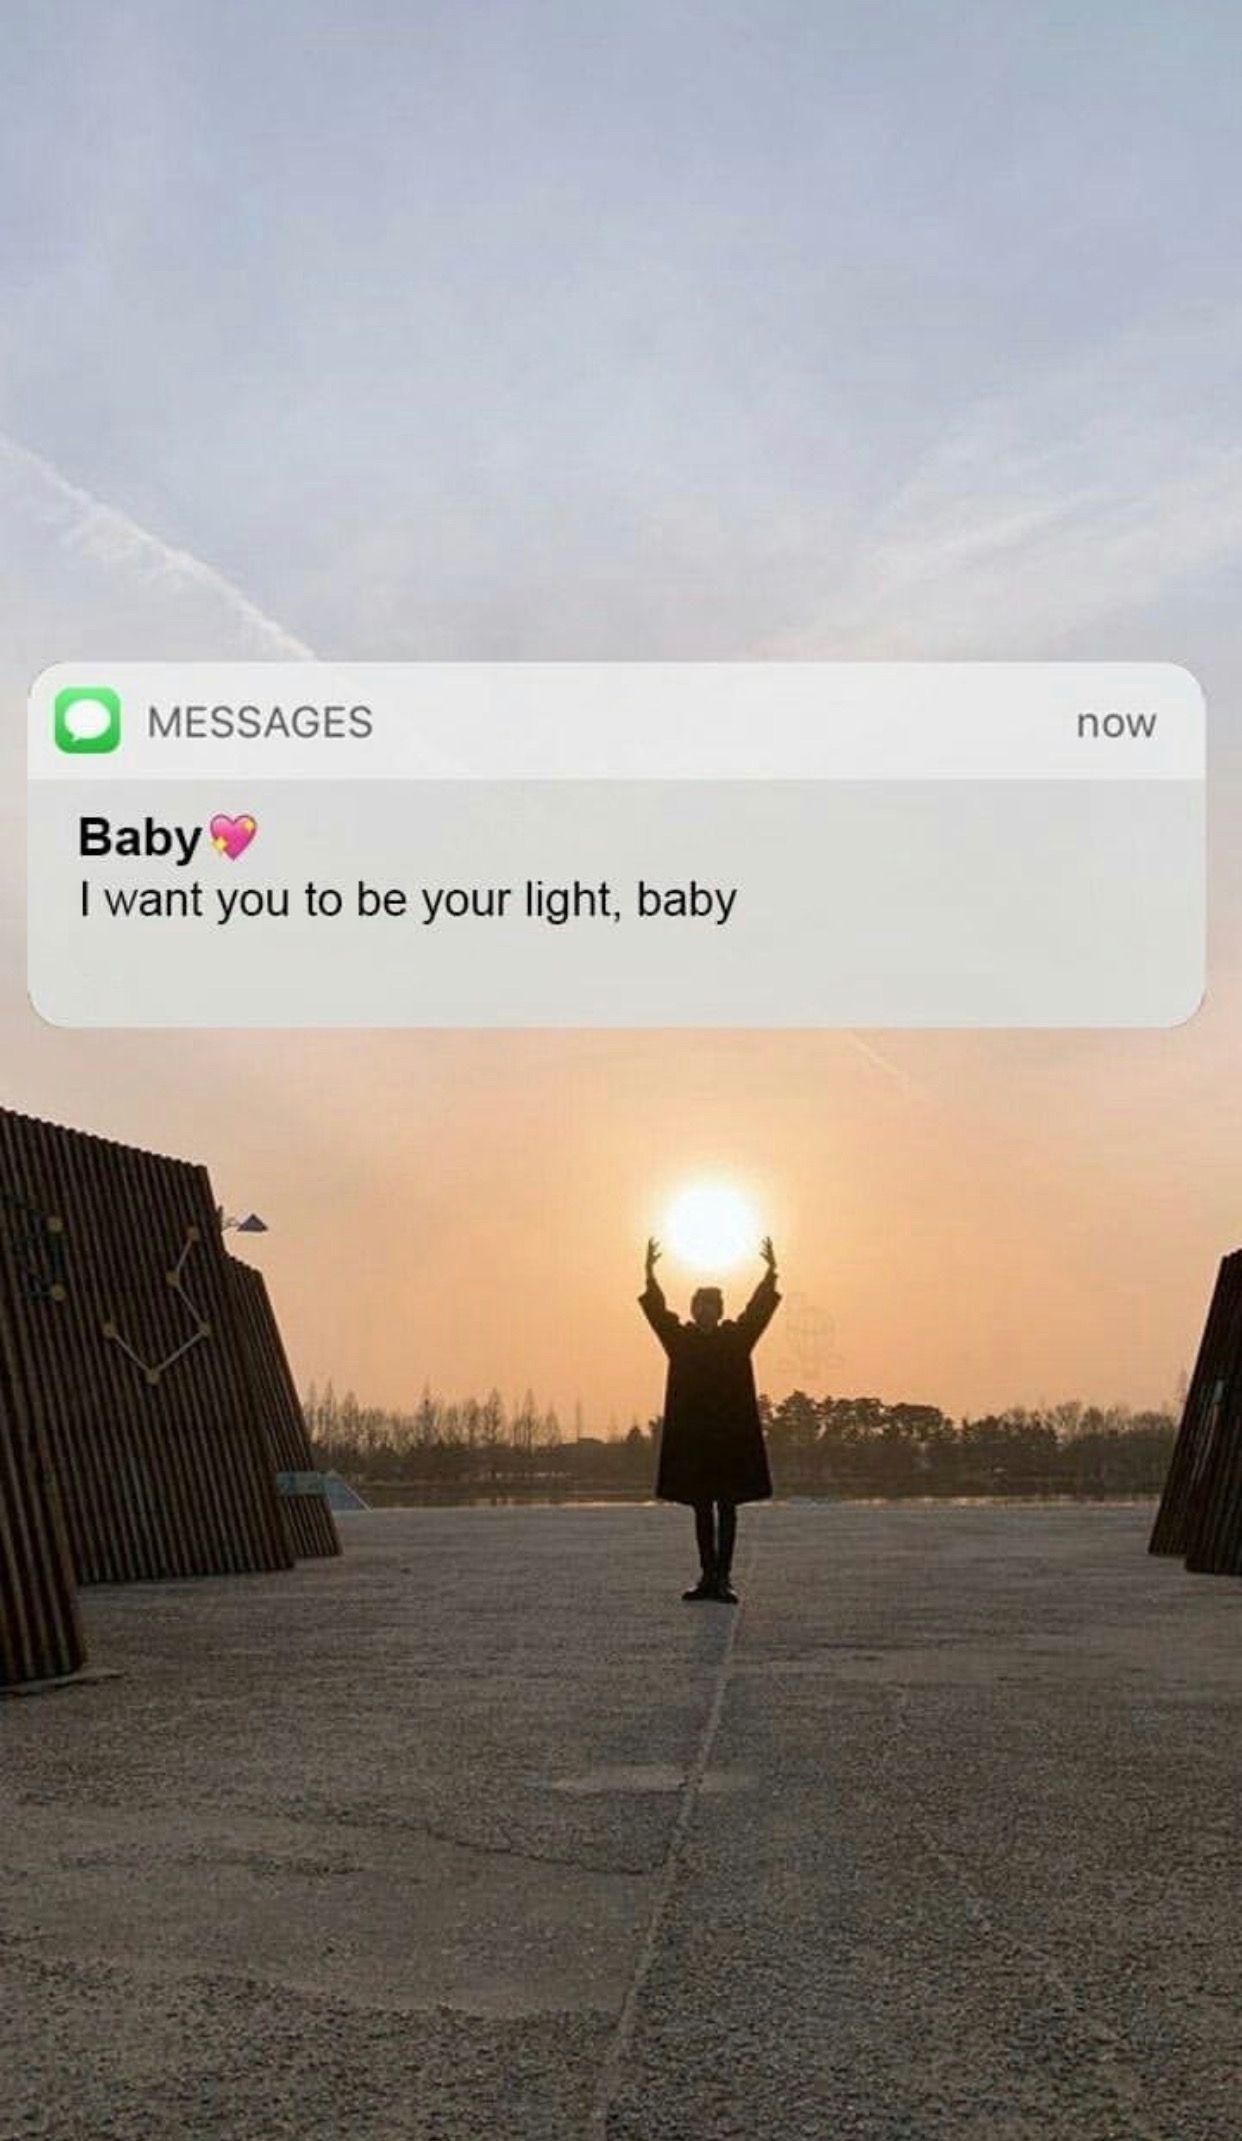 A person standing in front of the sun with a text message that says 